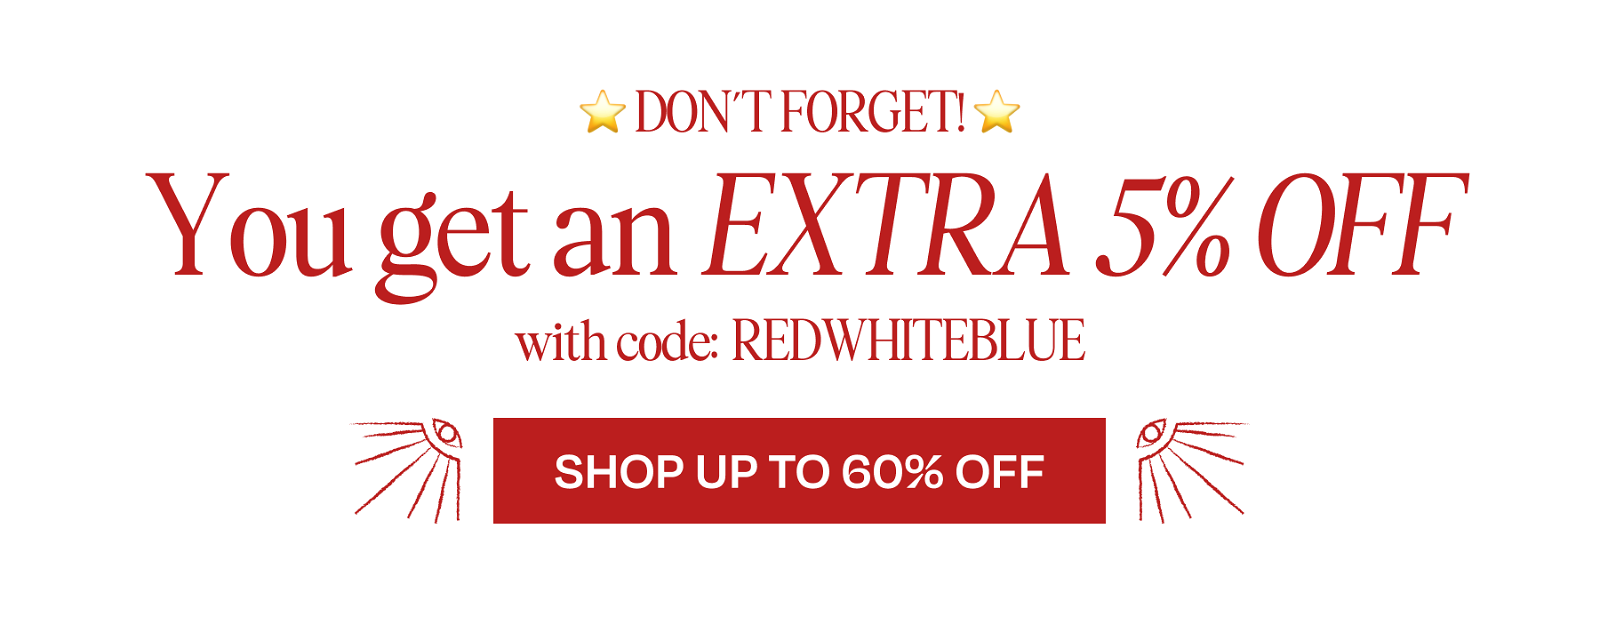 GET AN EXTRA 5% OFF WITH CODE: REDWHITEBLUE